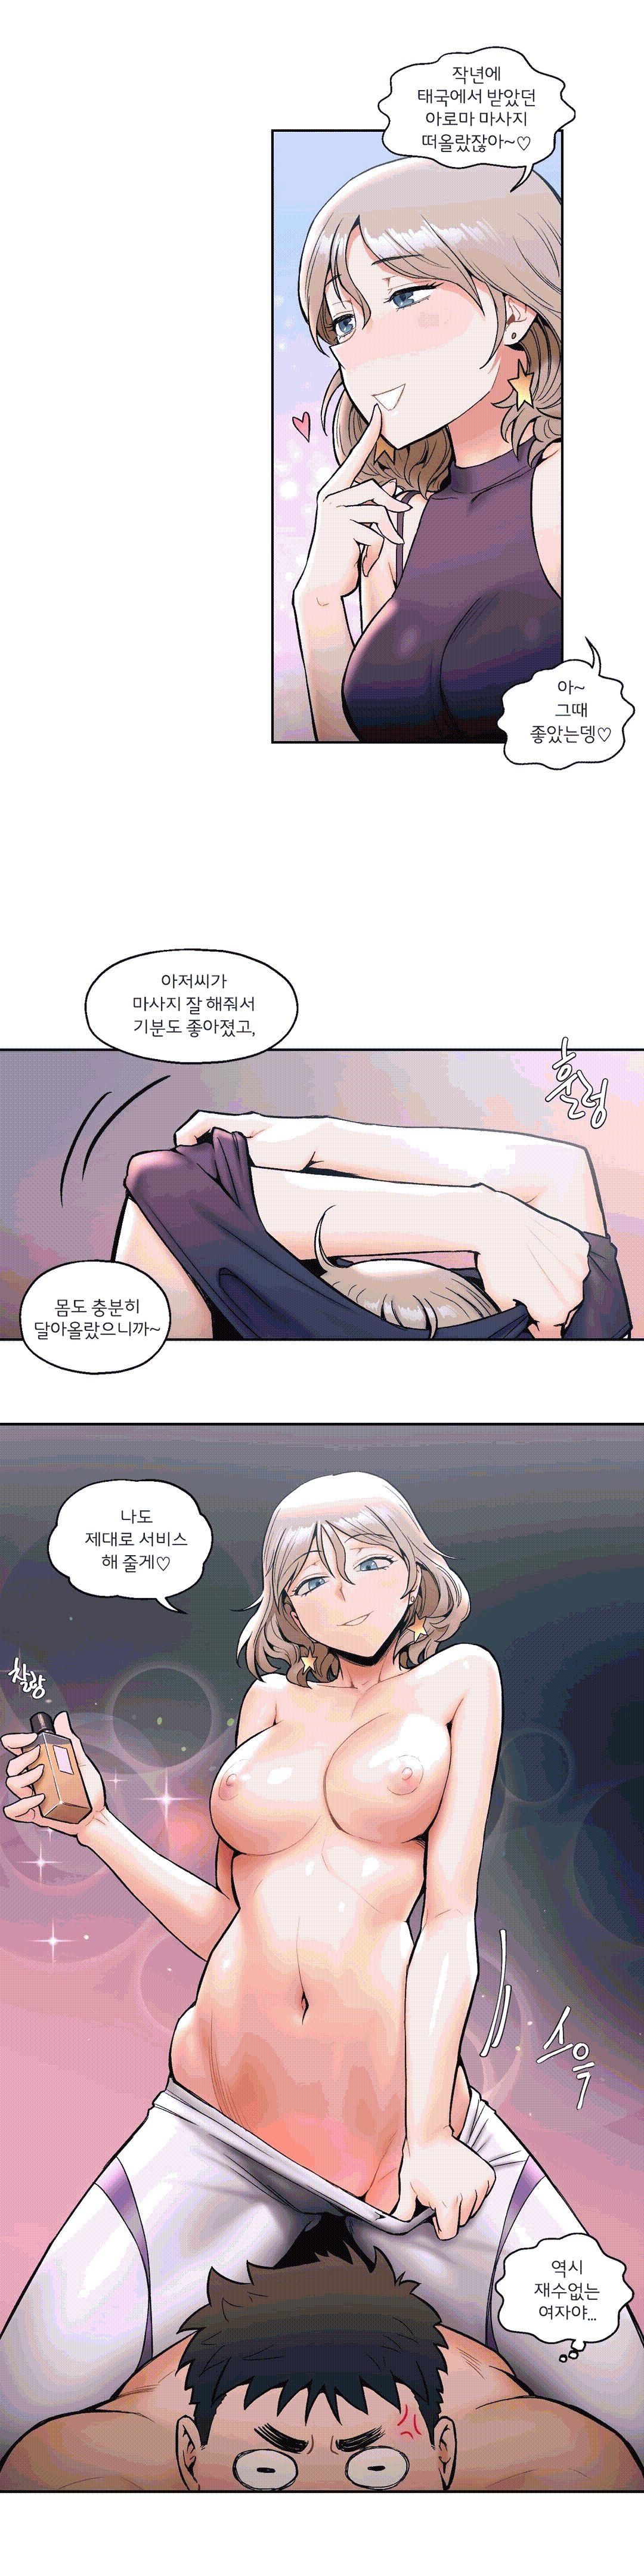 Sexercise Raw - Chapter 16 Page 4